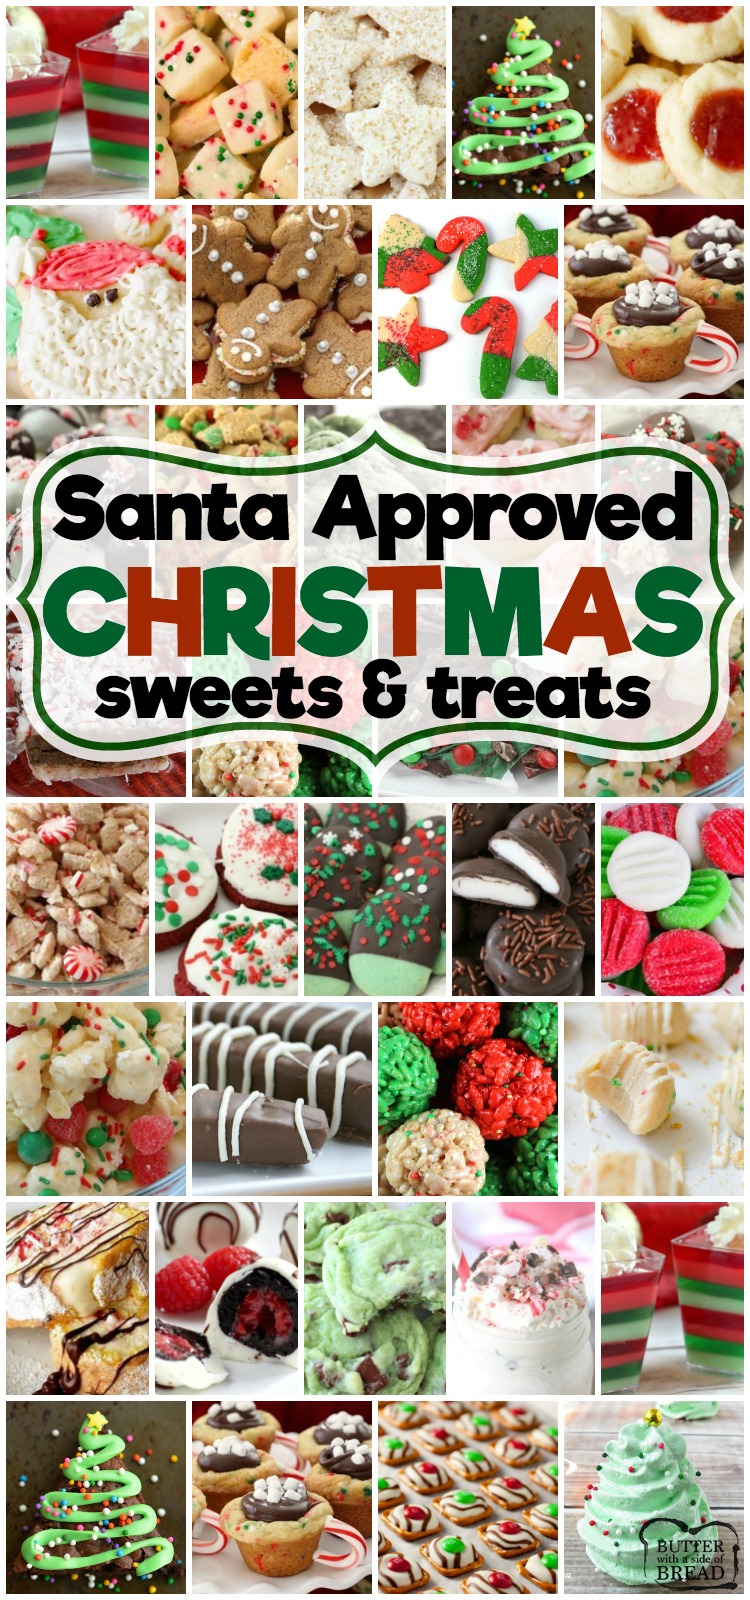 Best collection of easy Christmas dessert recipes ever- they're even Santa approved! Our Christmas desserts are perfect for holiday parties, cookie exchanges and neighbor goodie plates!  #christmas #desserts #treats #candy #cookies #holiday #parties #Santa #recipe from BUTTER WITH A SIDE OF BREAD